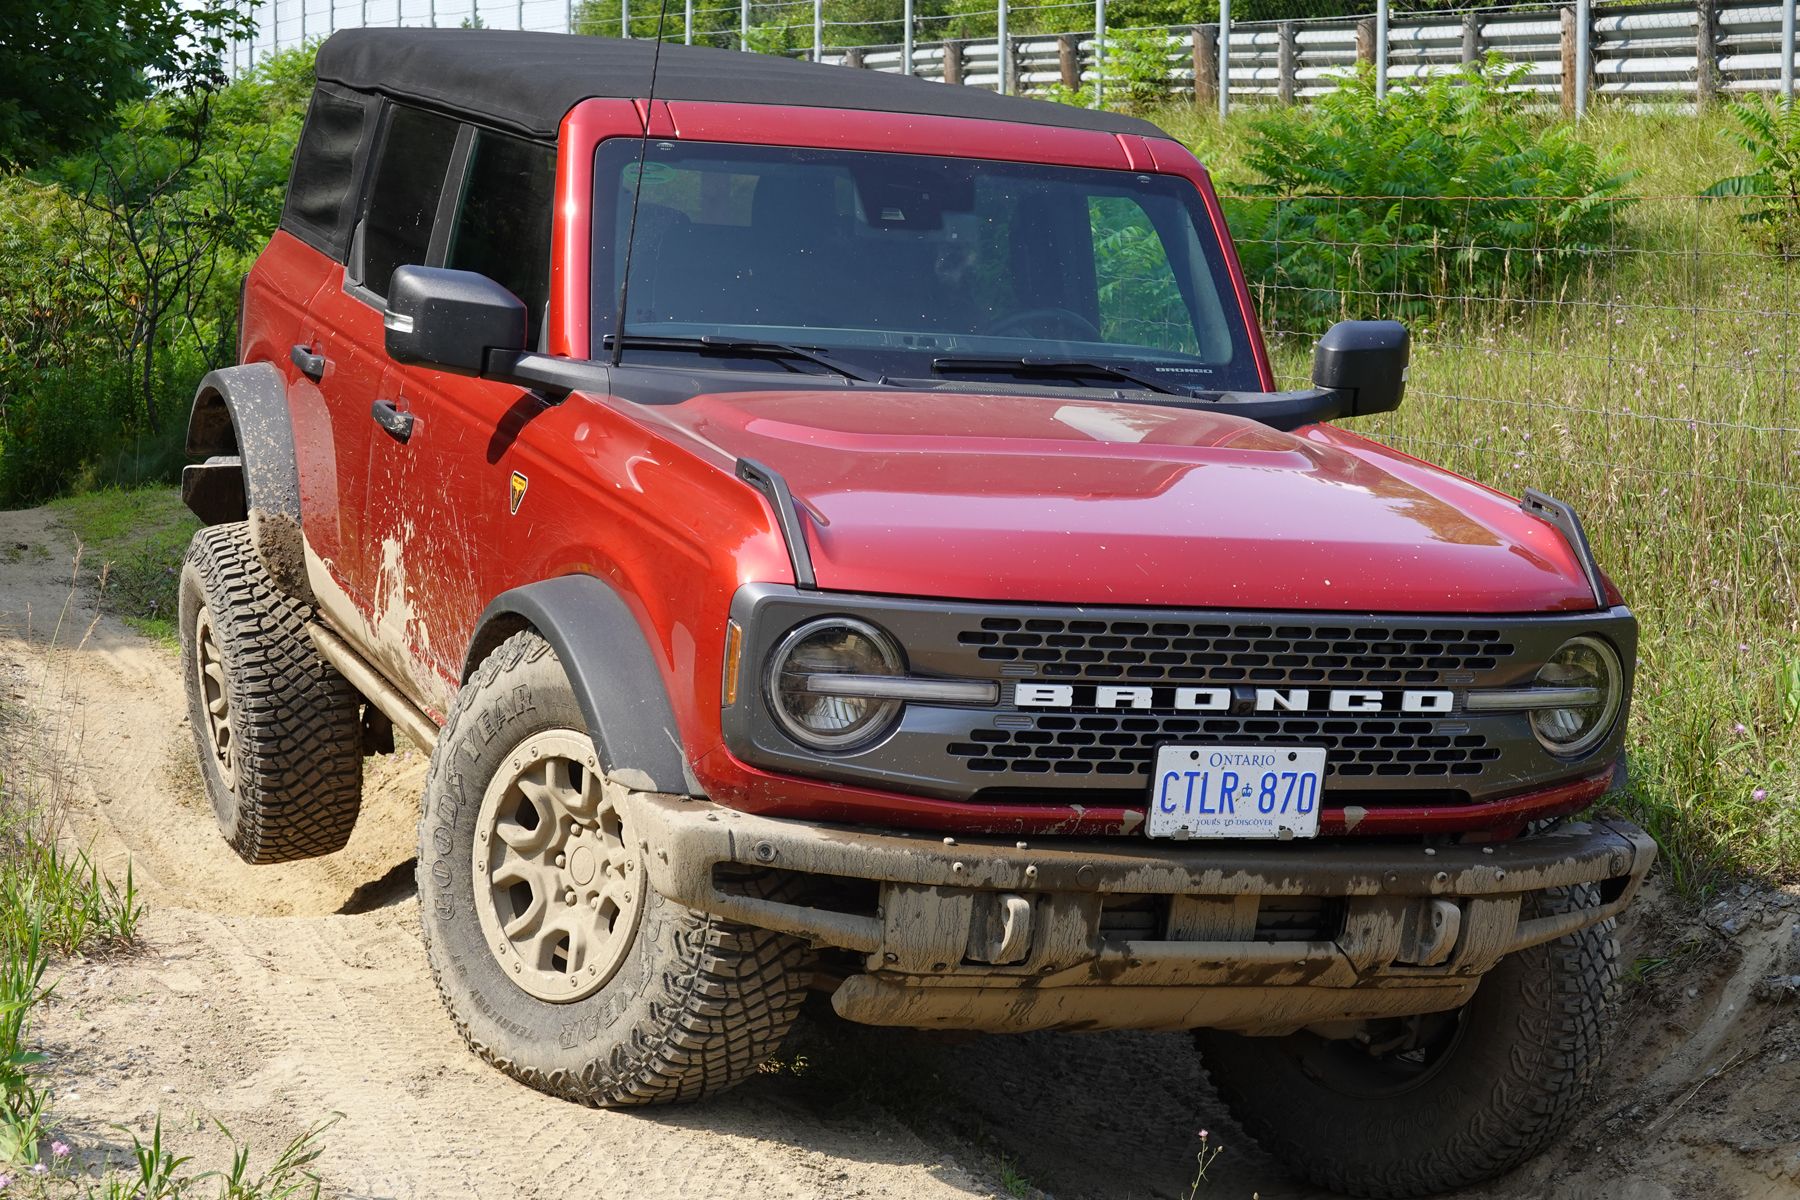 NHTSA issues first recall for Ford Bronco due to passenger airbags